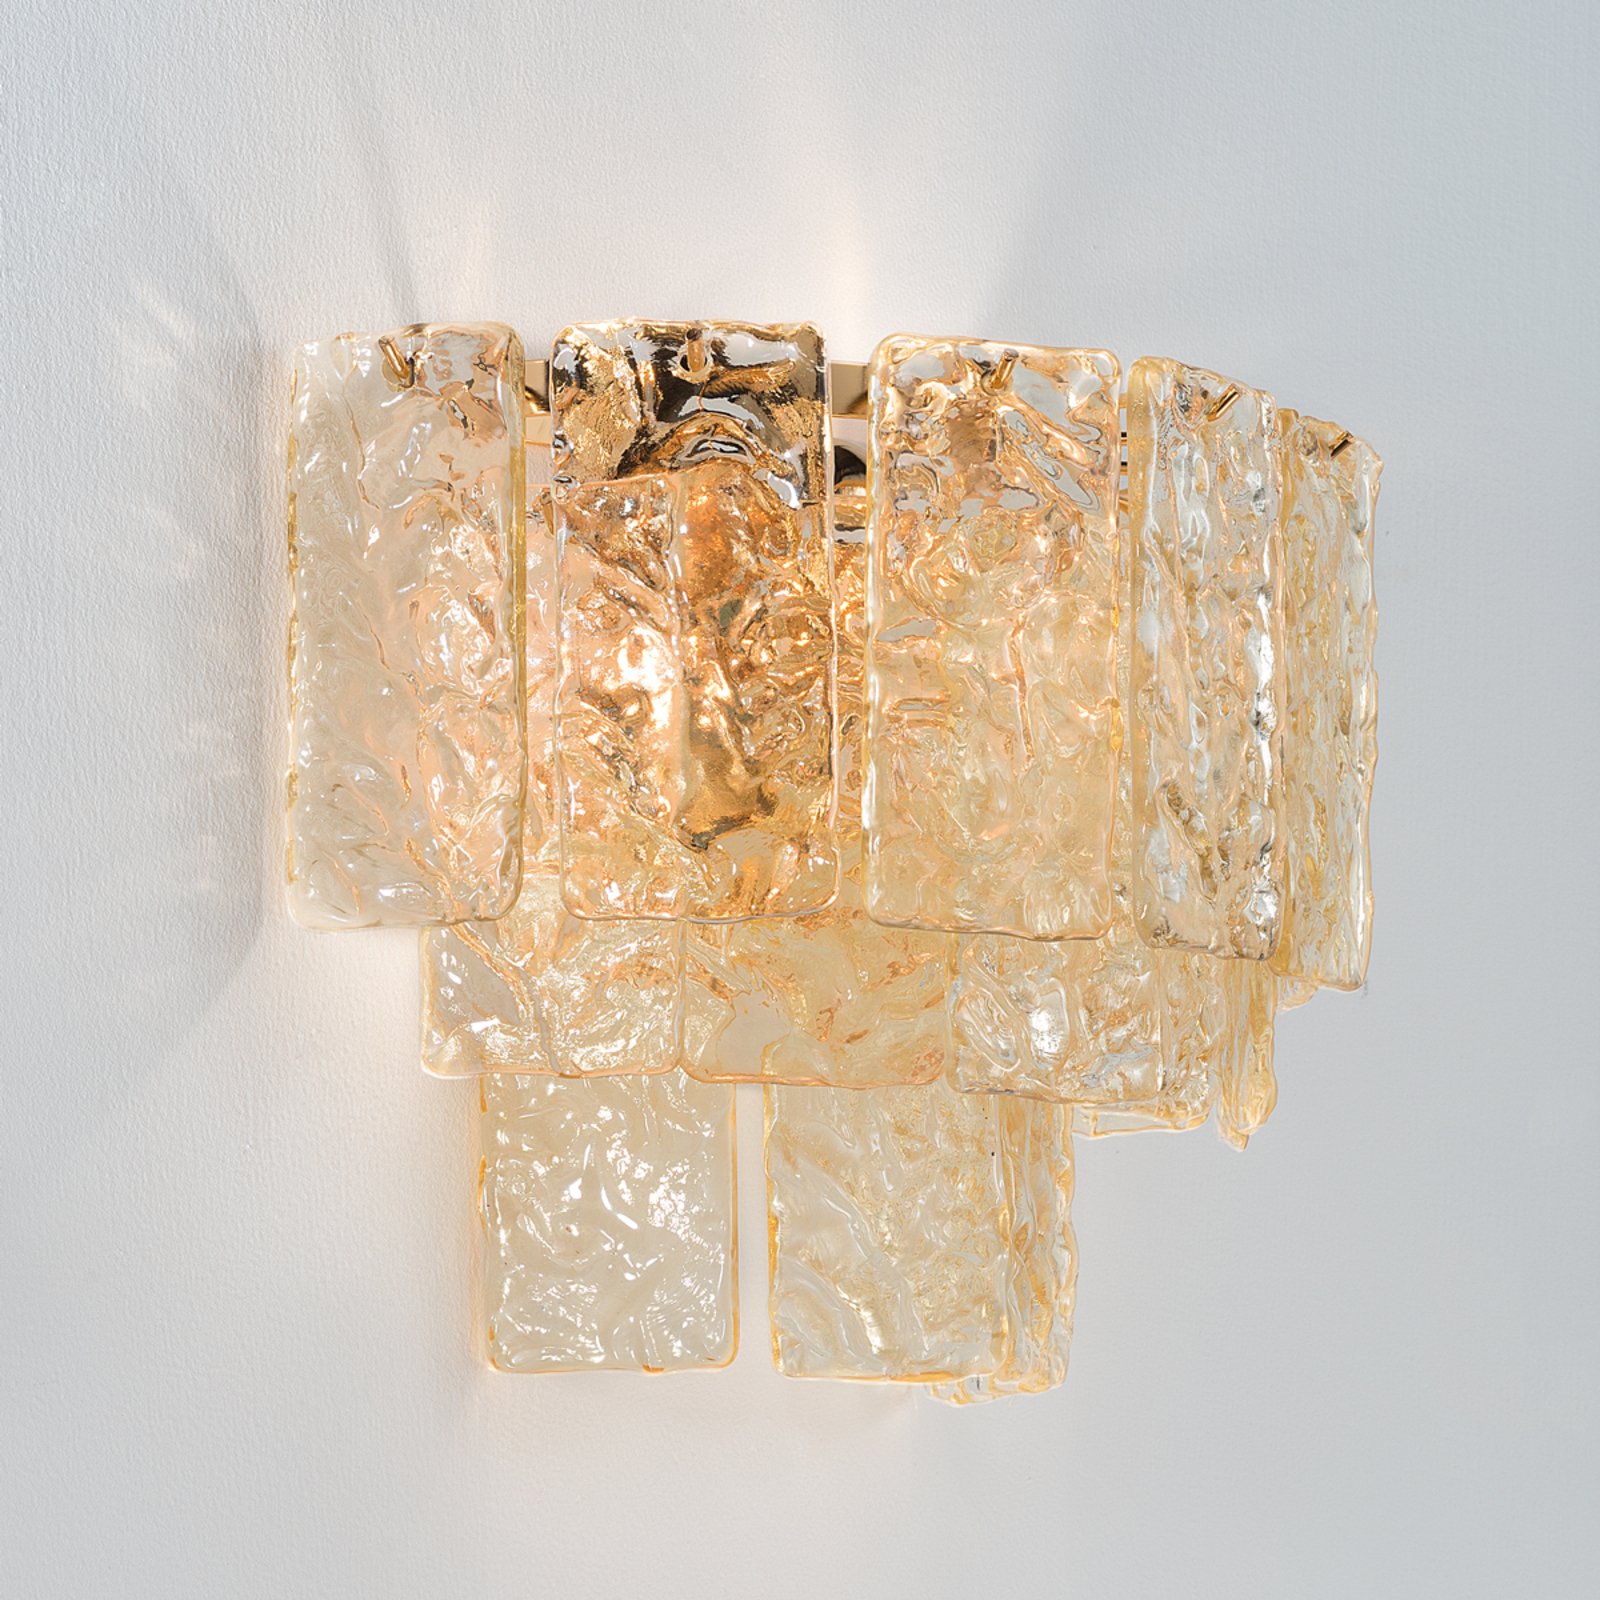 Glace glass wall light with gold mount